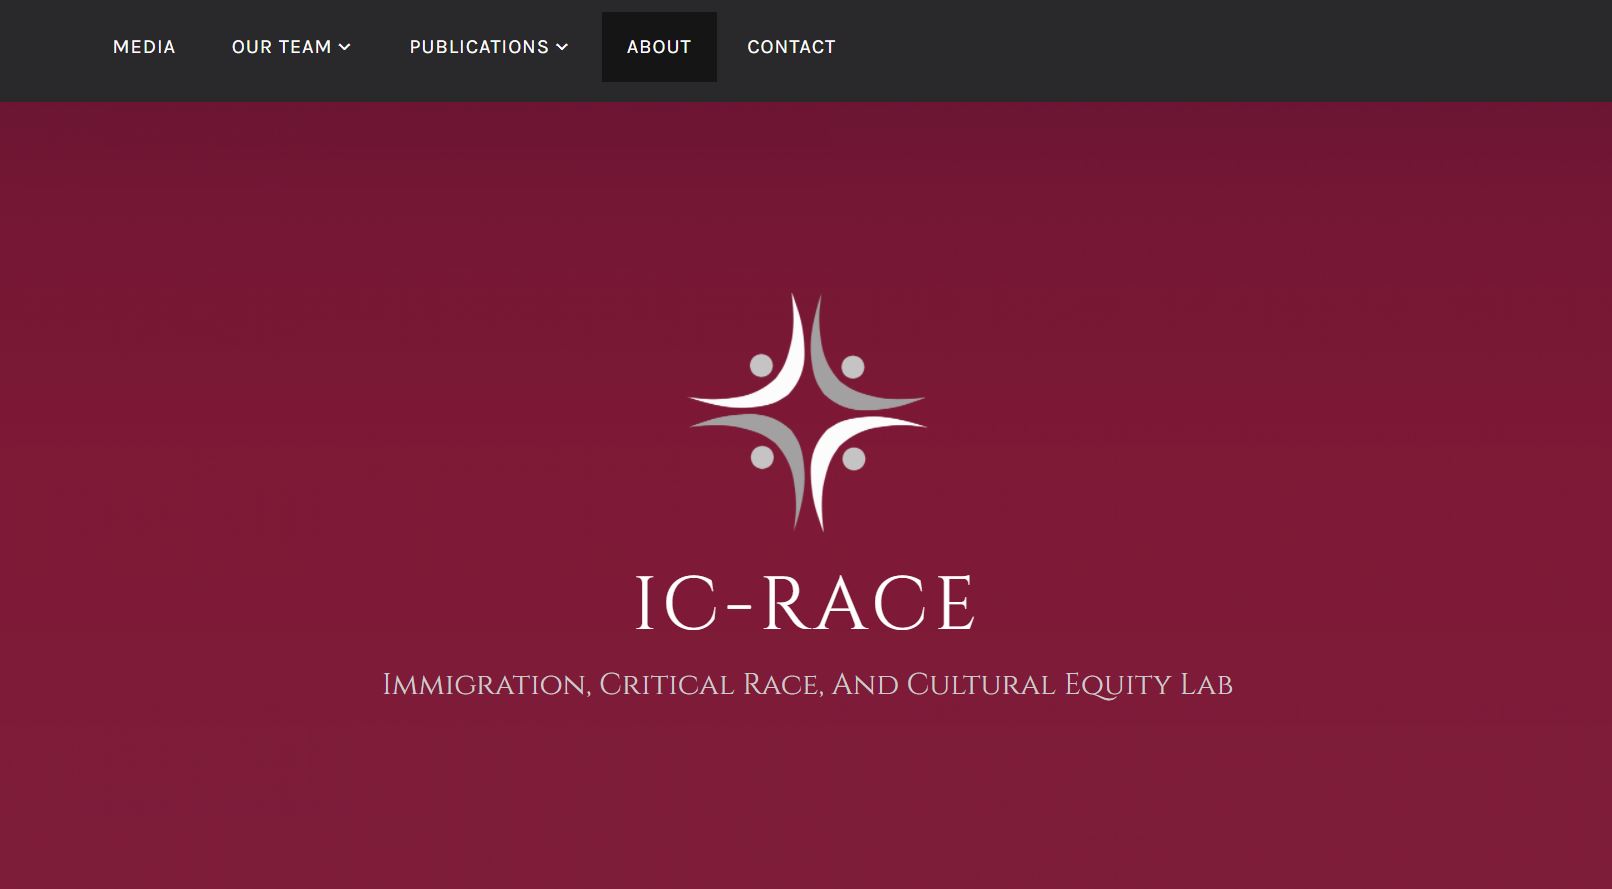 IC-RACE - Immigration, Critical Race, And Cultural Equity Lab